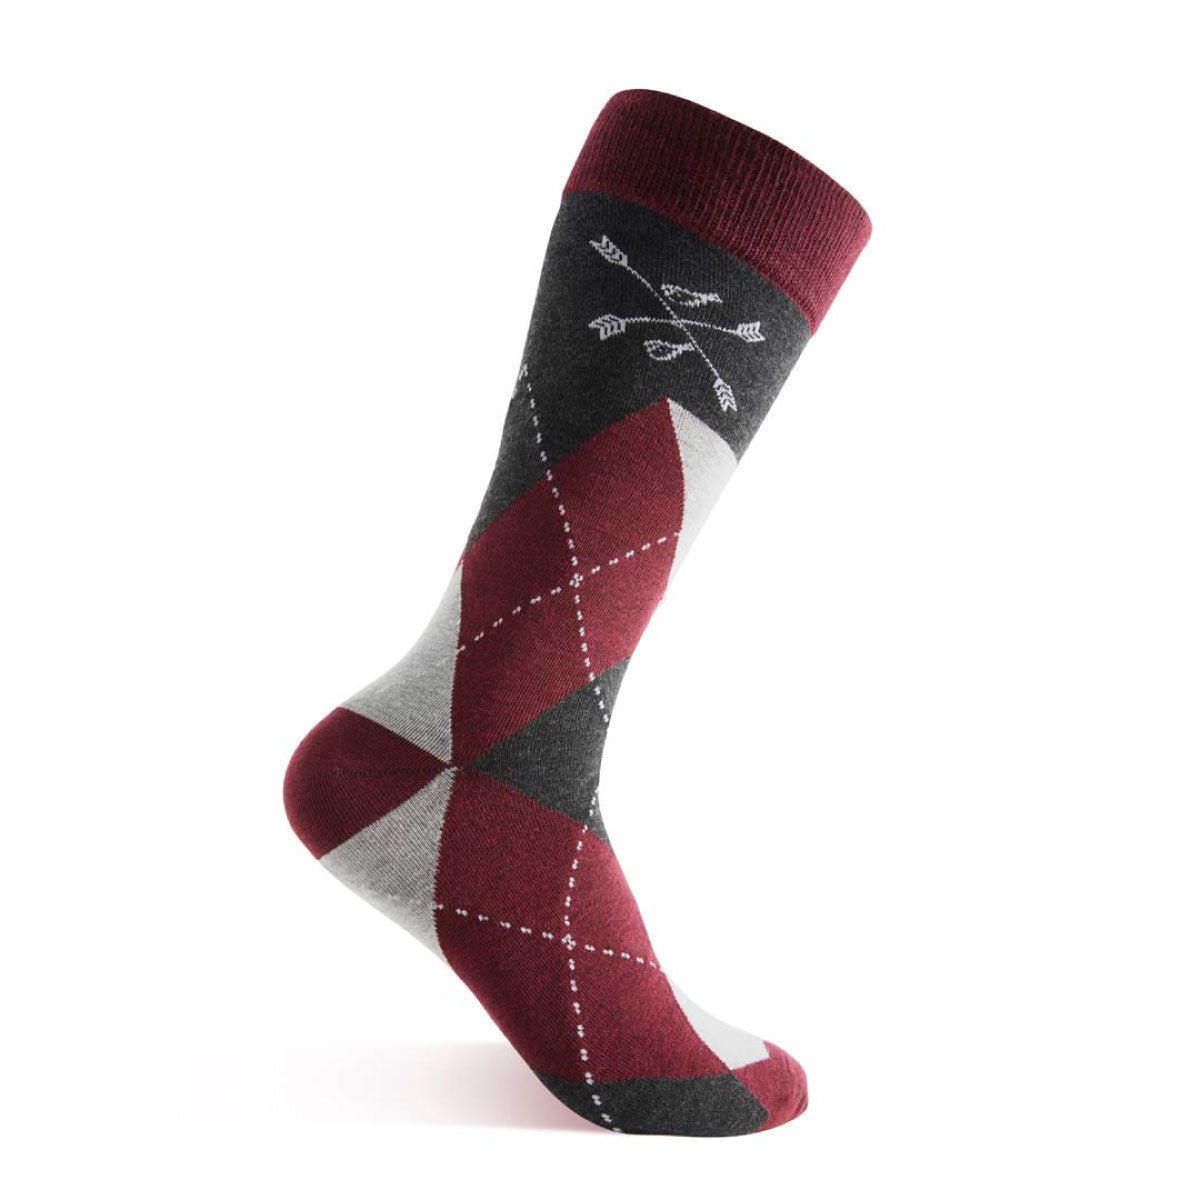 Red, charcoal, grey, and white argyle men's dress sock.